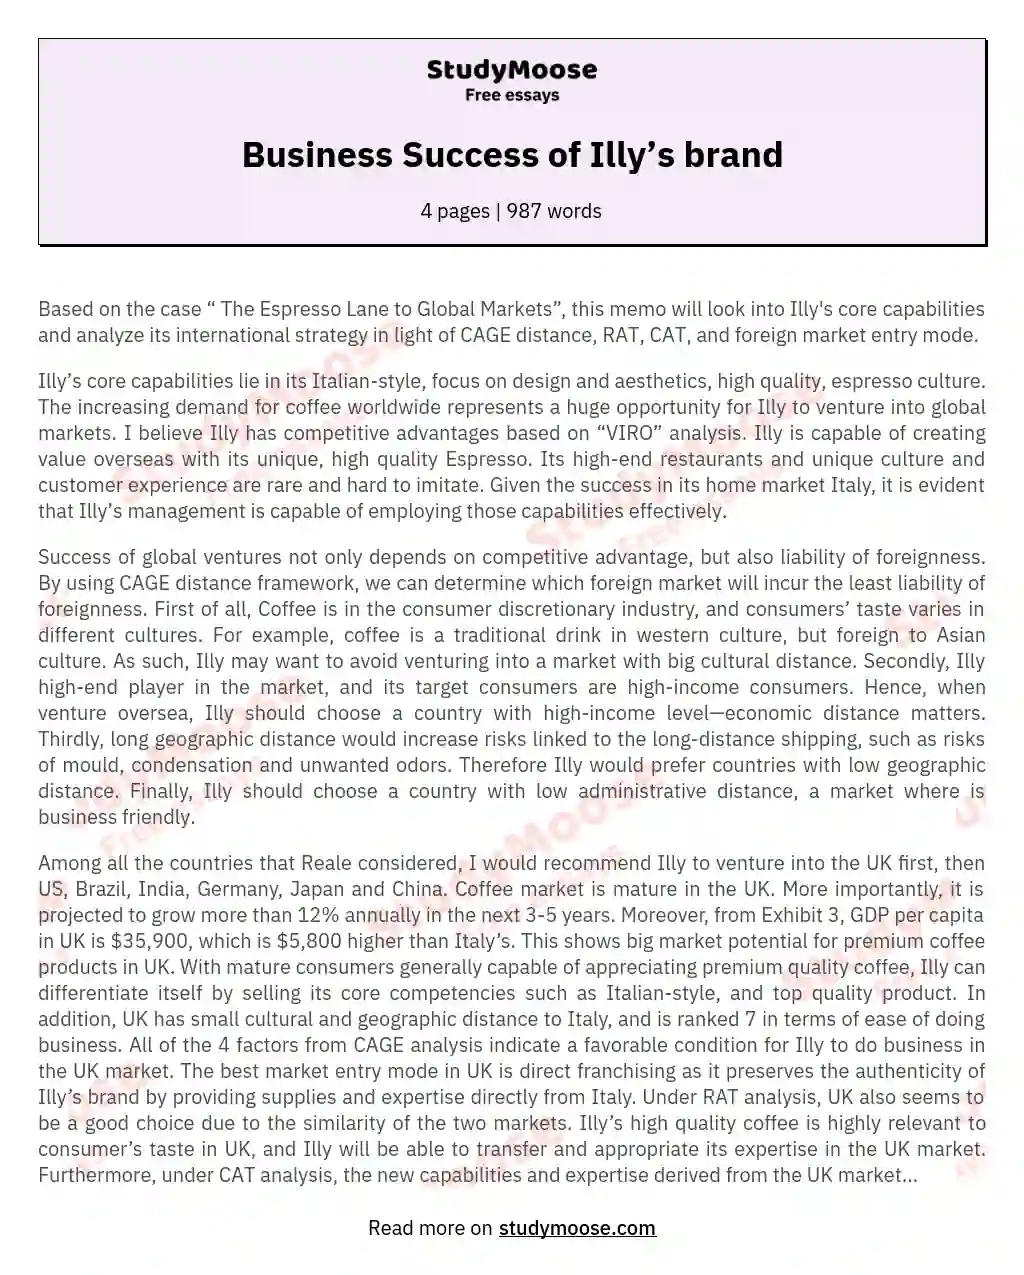 Business Success of Illy’s brand essay